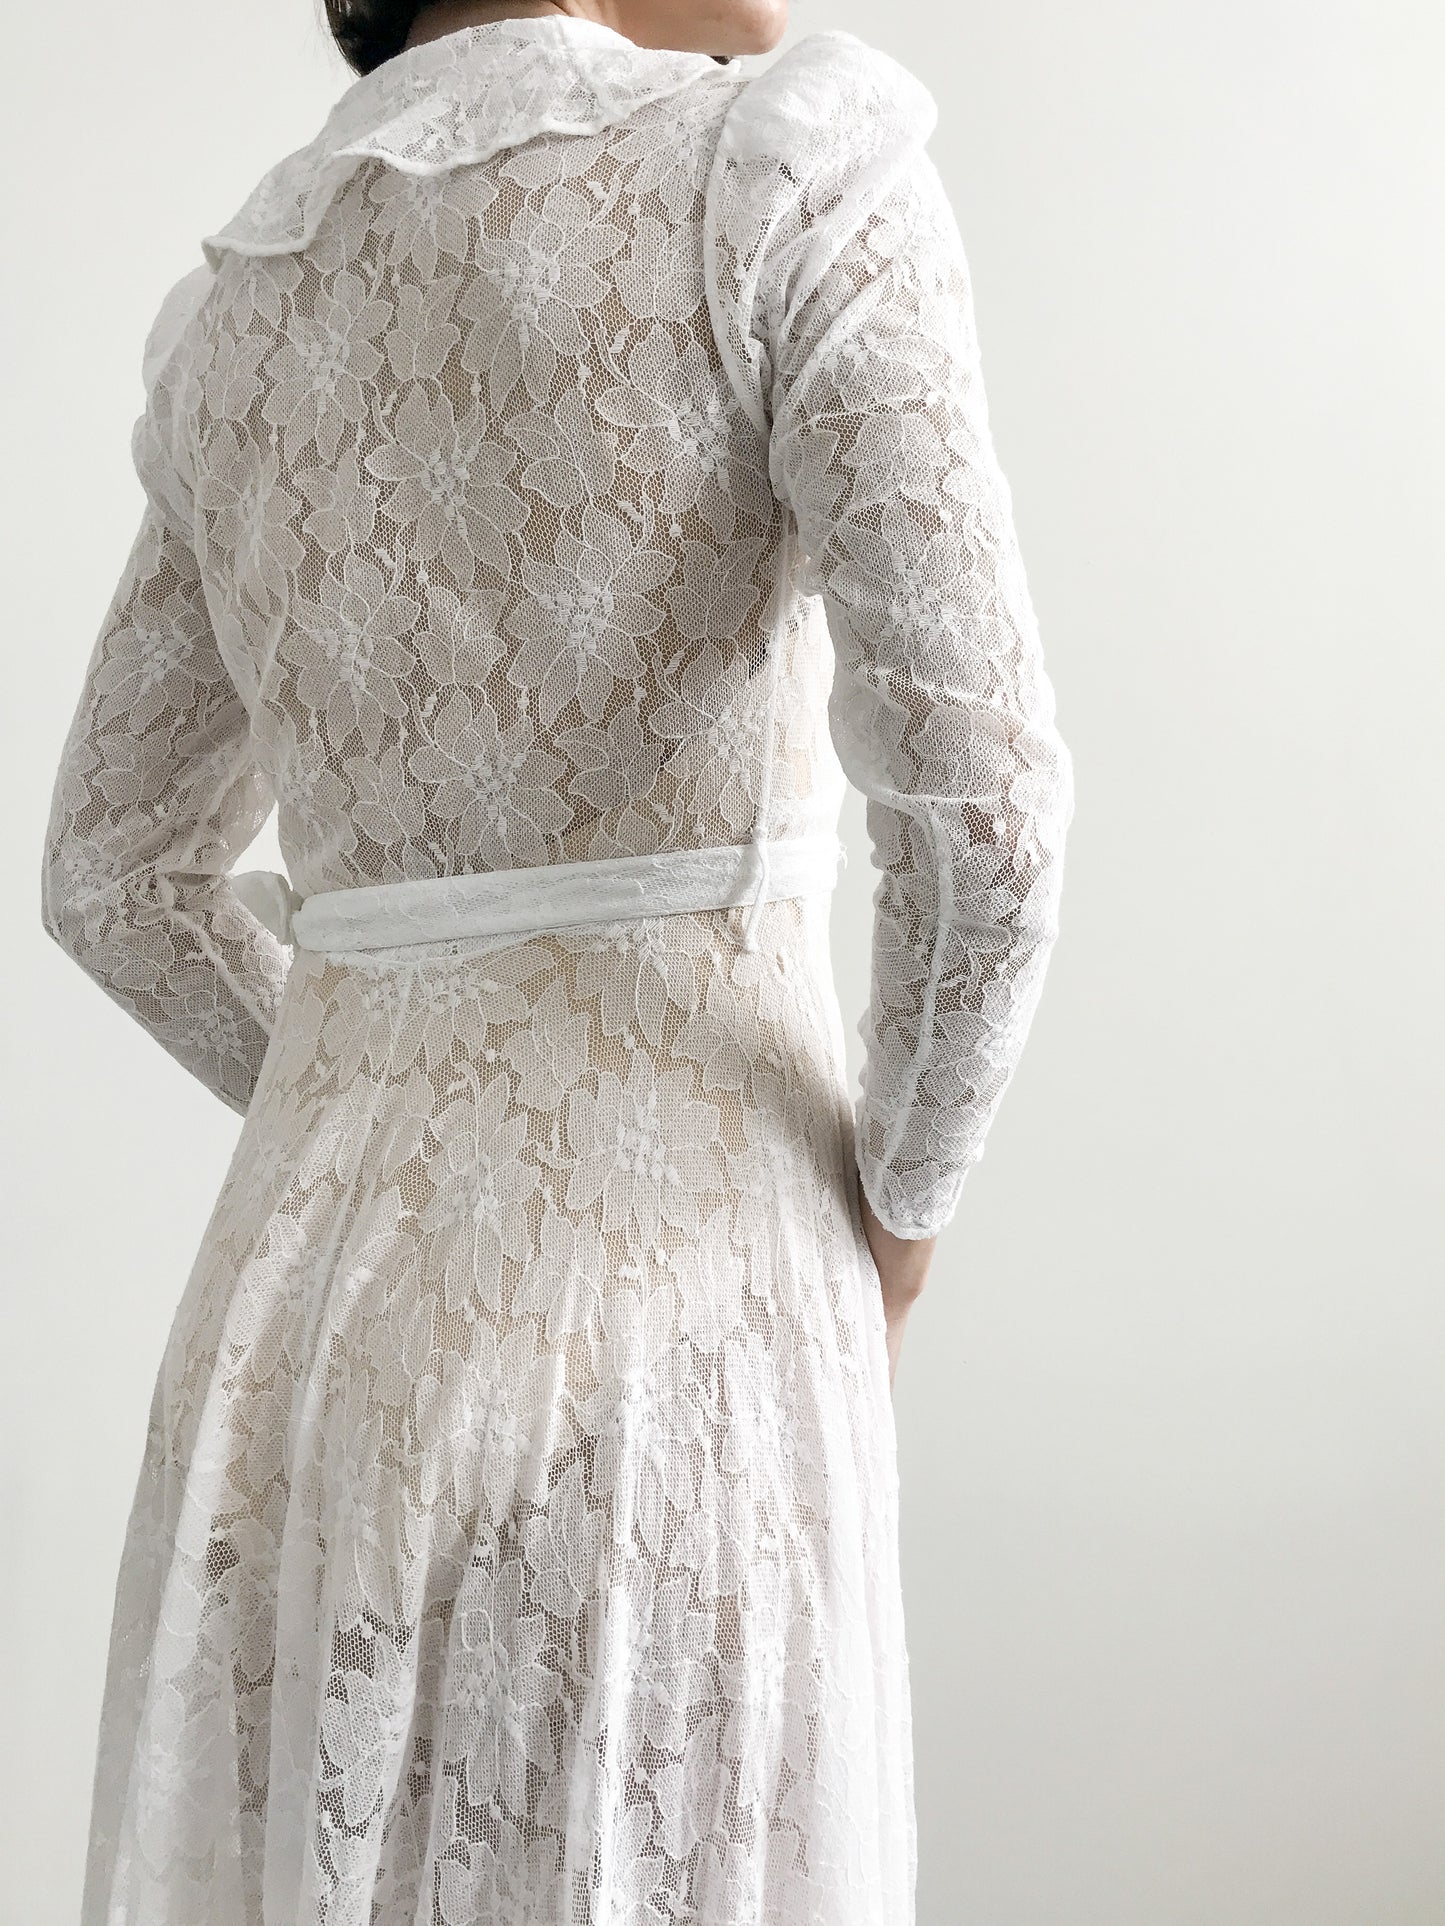 1940s Collared Floral Lace Wedding Dress